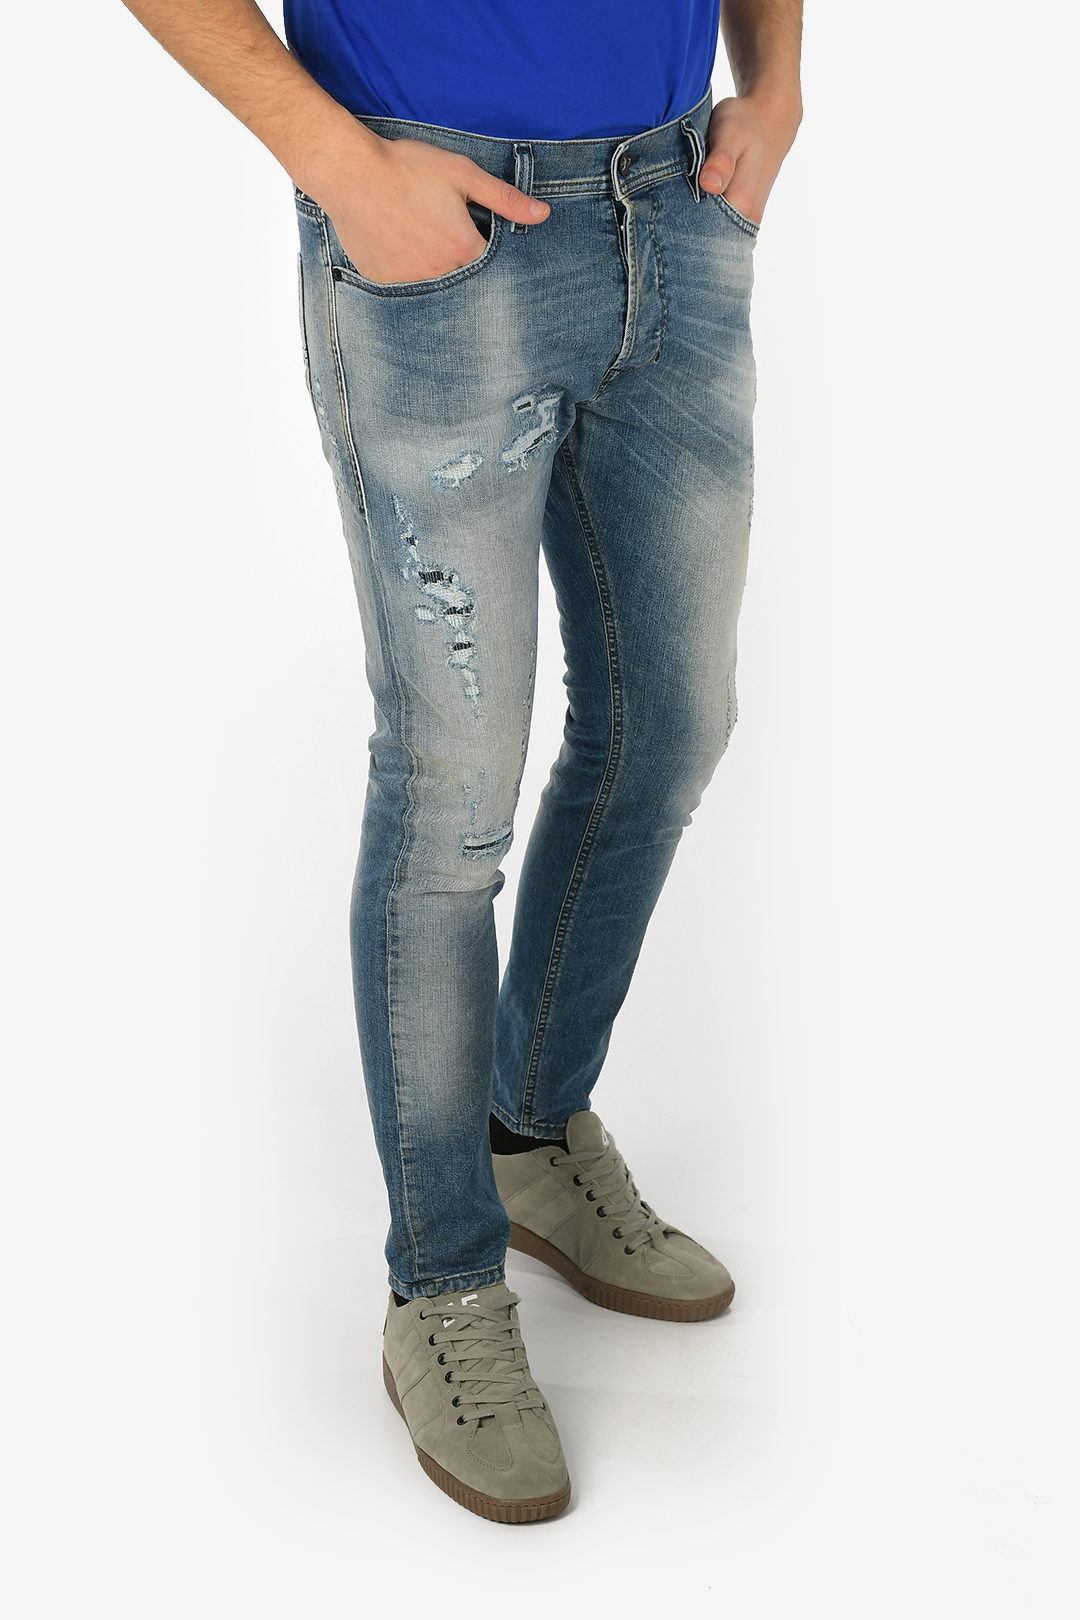 D.N.A. 16cm Stone Washed TEPPHAR Slim Fit Jeans L30